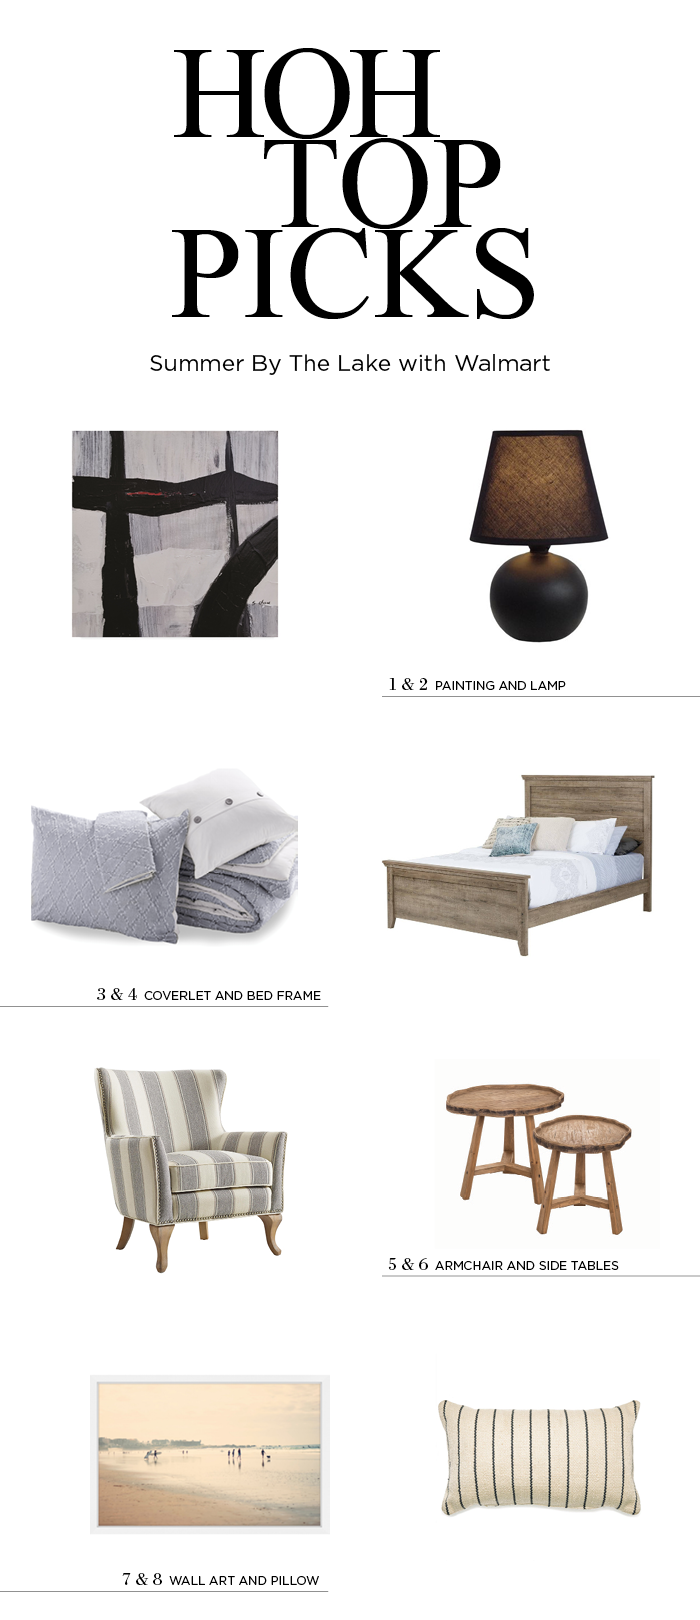 Lake Living - Top Picks for Summer by the Lake Home Decor by Walmart